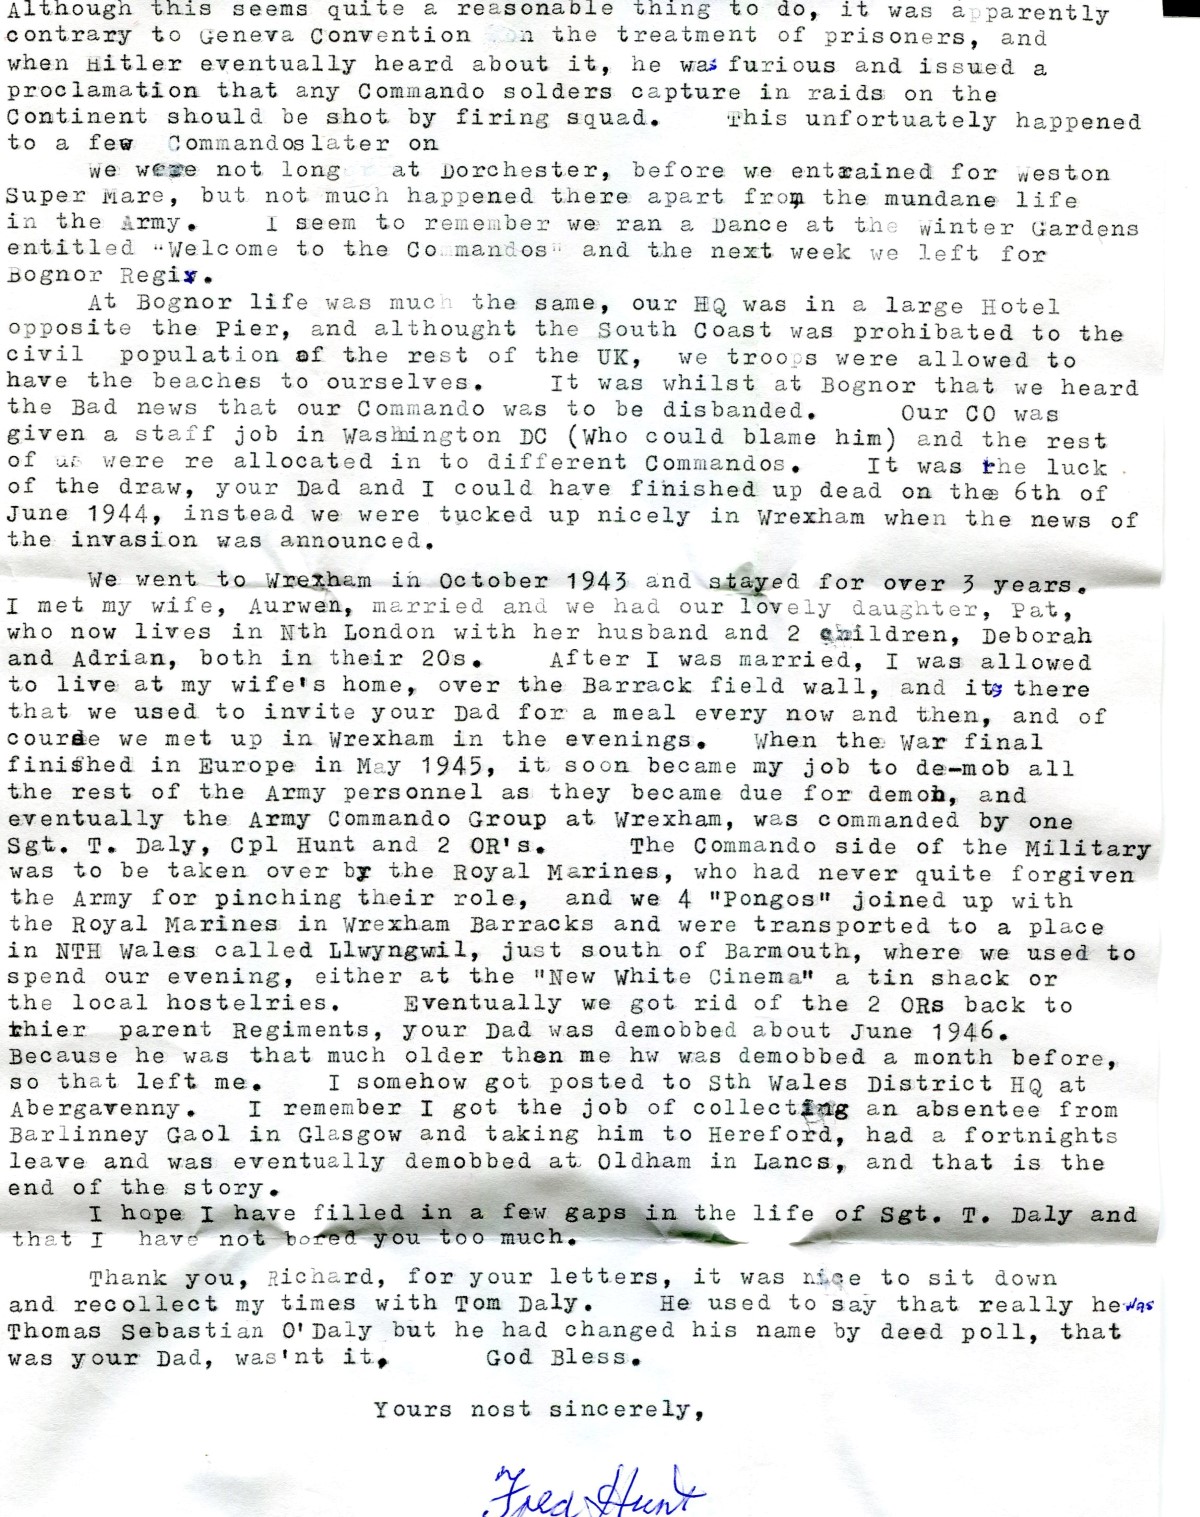 2nd letter (page 2) from Fred Hunt to the son of Tom Daly (No.12 Cdo & HOC)